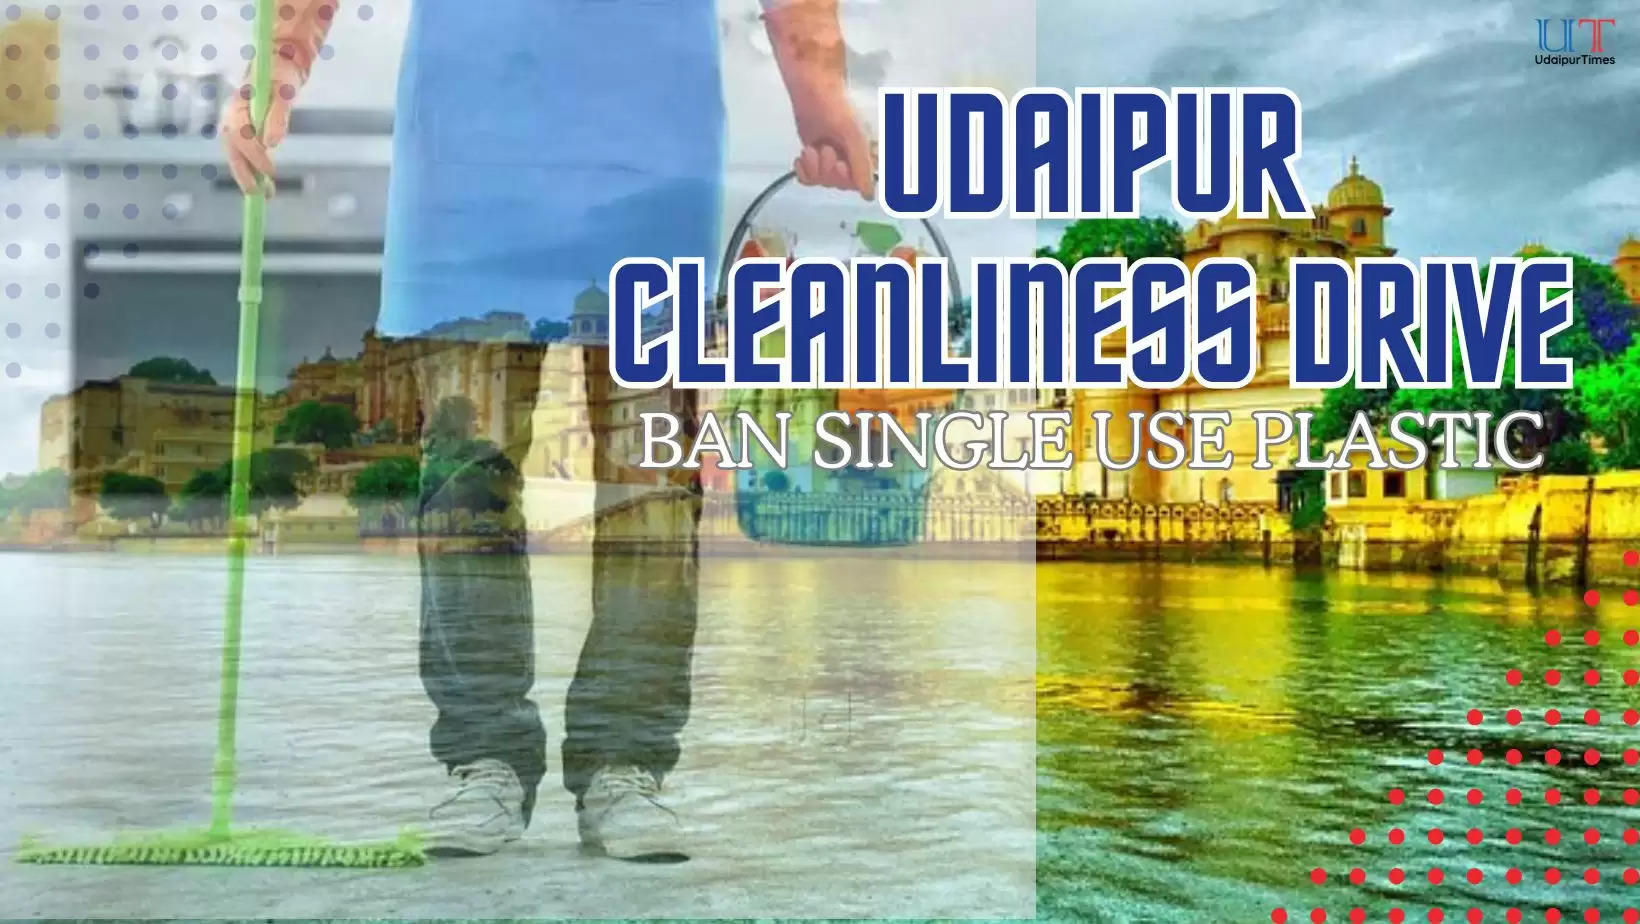 Udaipur Aims for Cleanliness Leadership: Steps Taken to Ban Single-Use Plastic in Udaipur